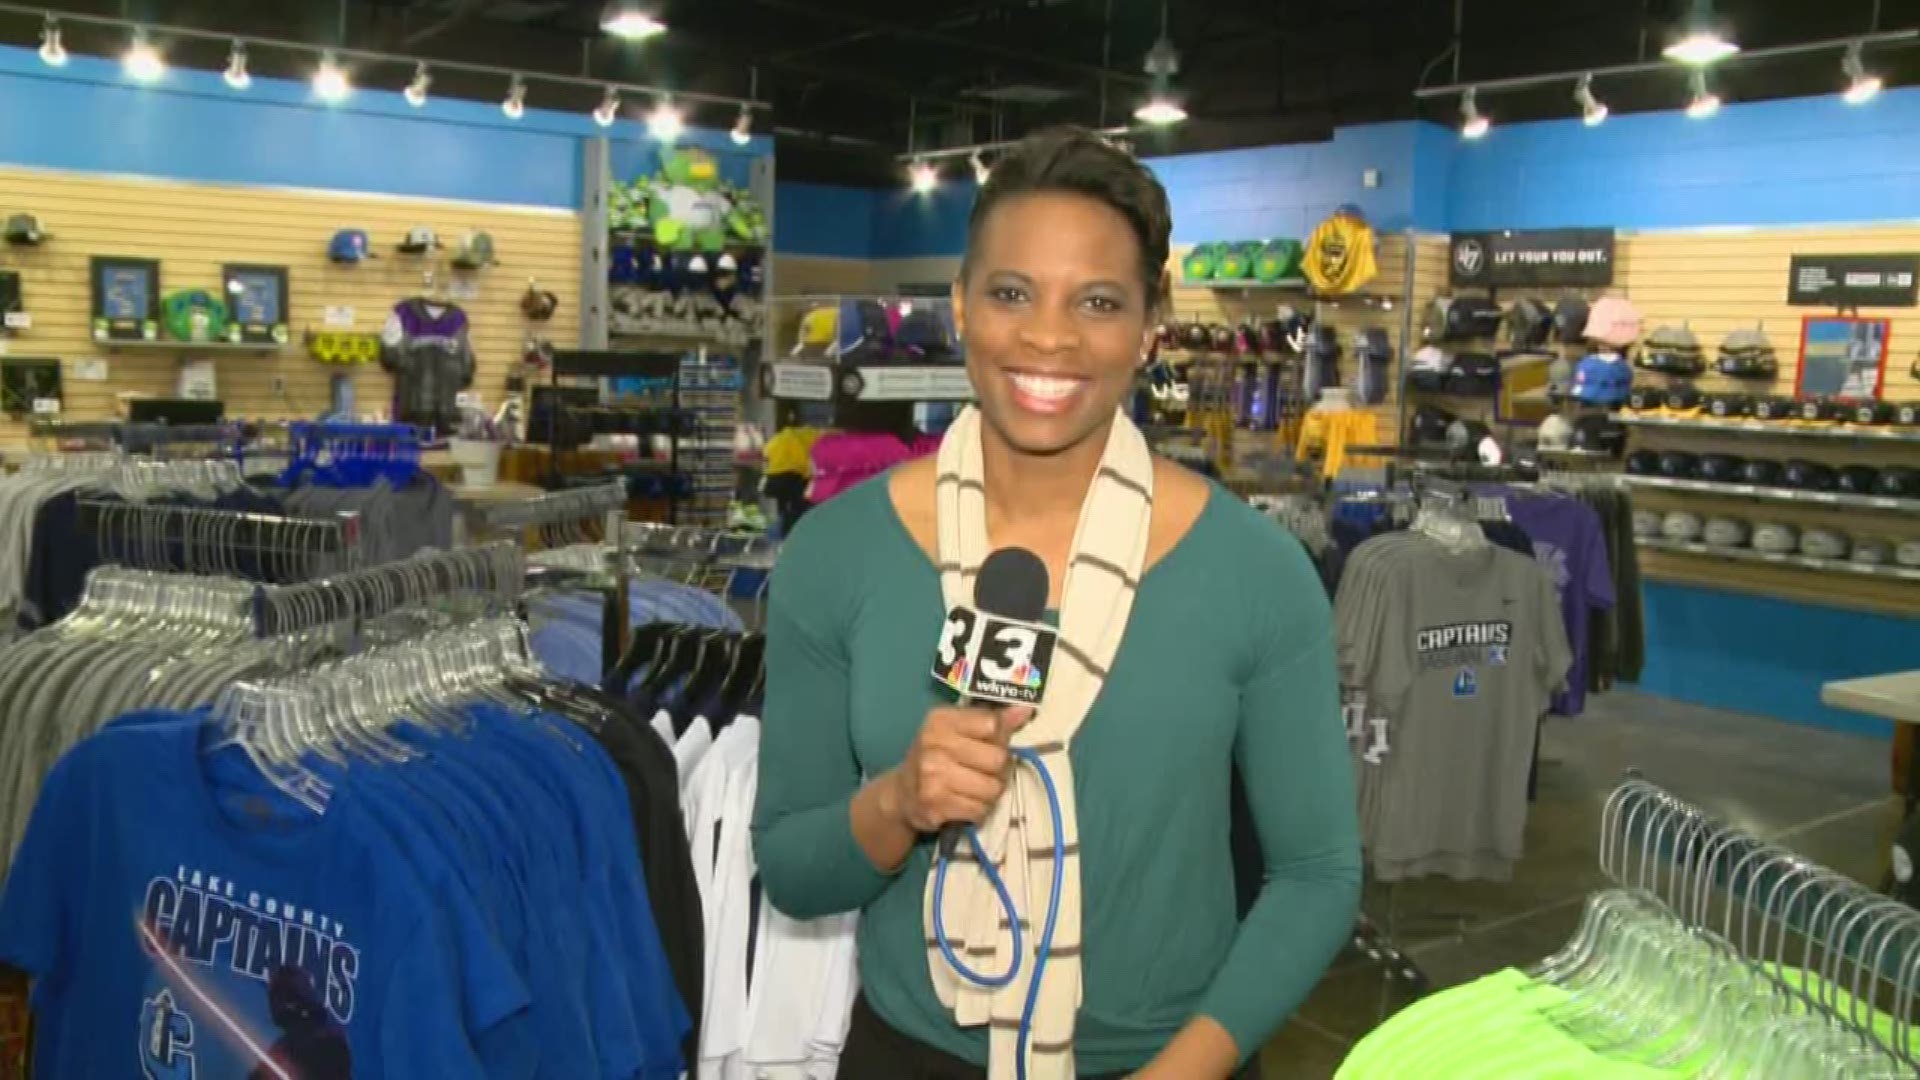 April 5, 2018: Play ball! The Lake County Captains get their season started tonight. WKYC's Dorsena Drakeford has a preview.